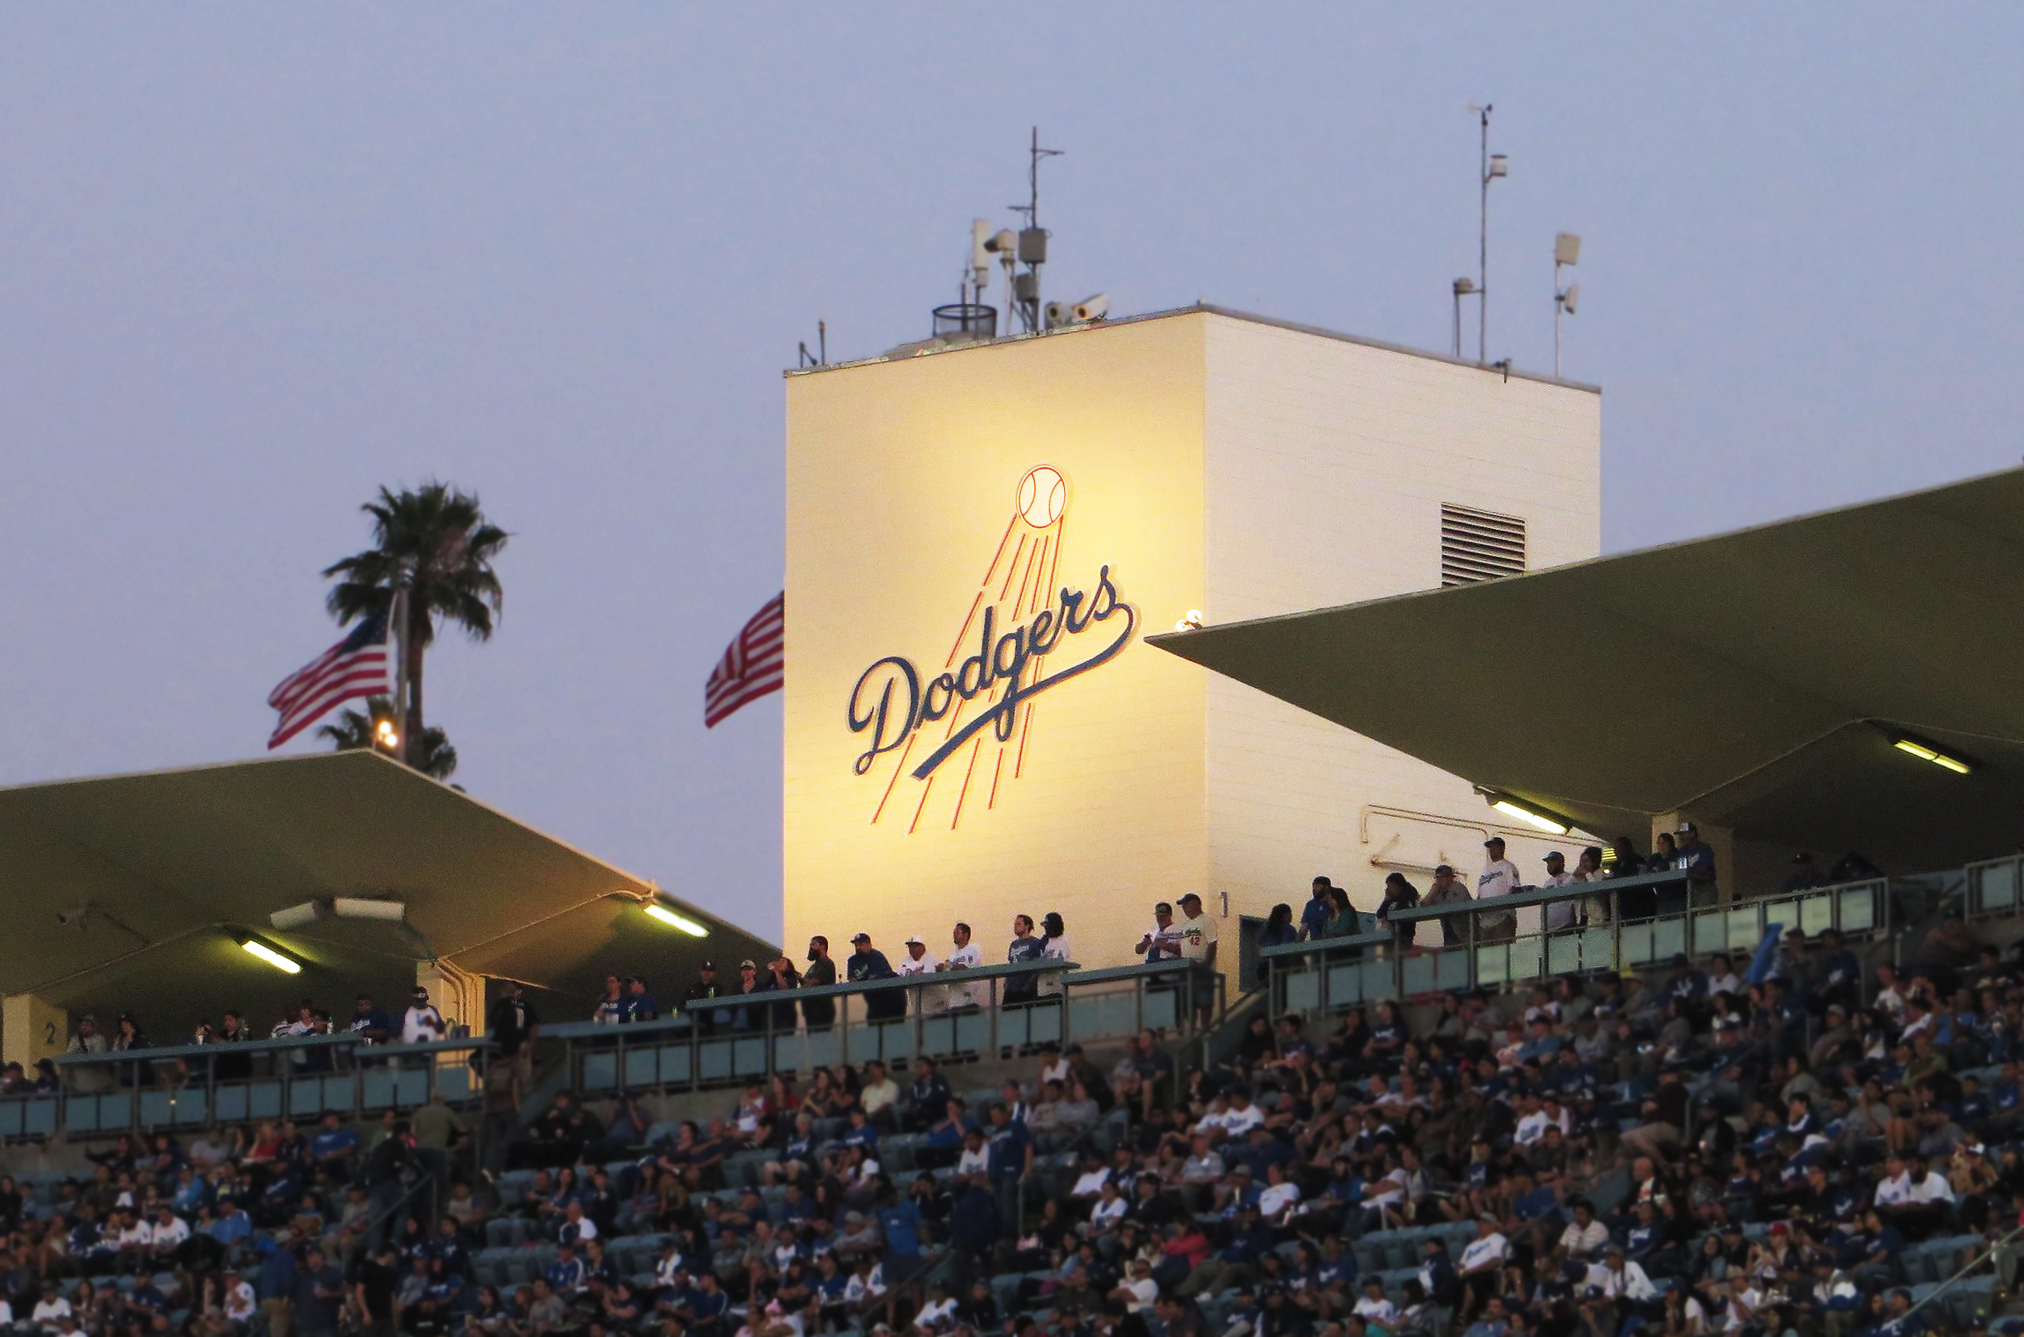 It's Mexican Heritage Night at - Los Angeles Dodgers